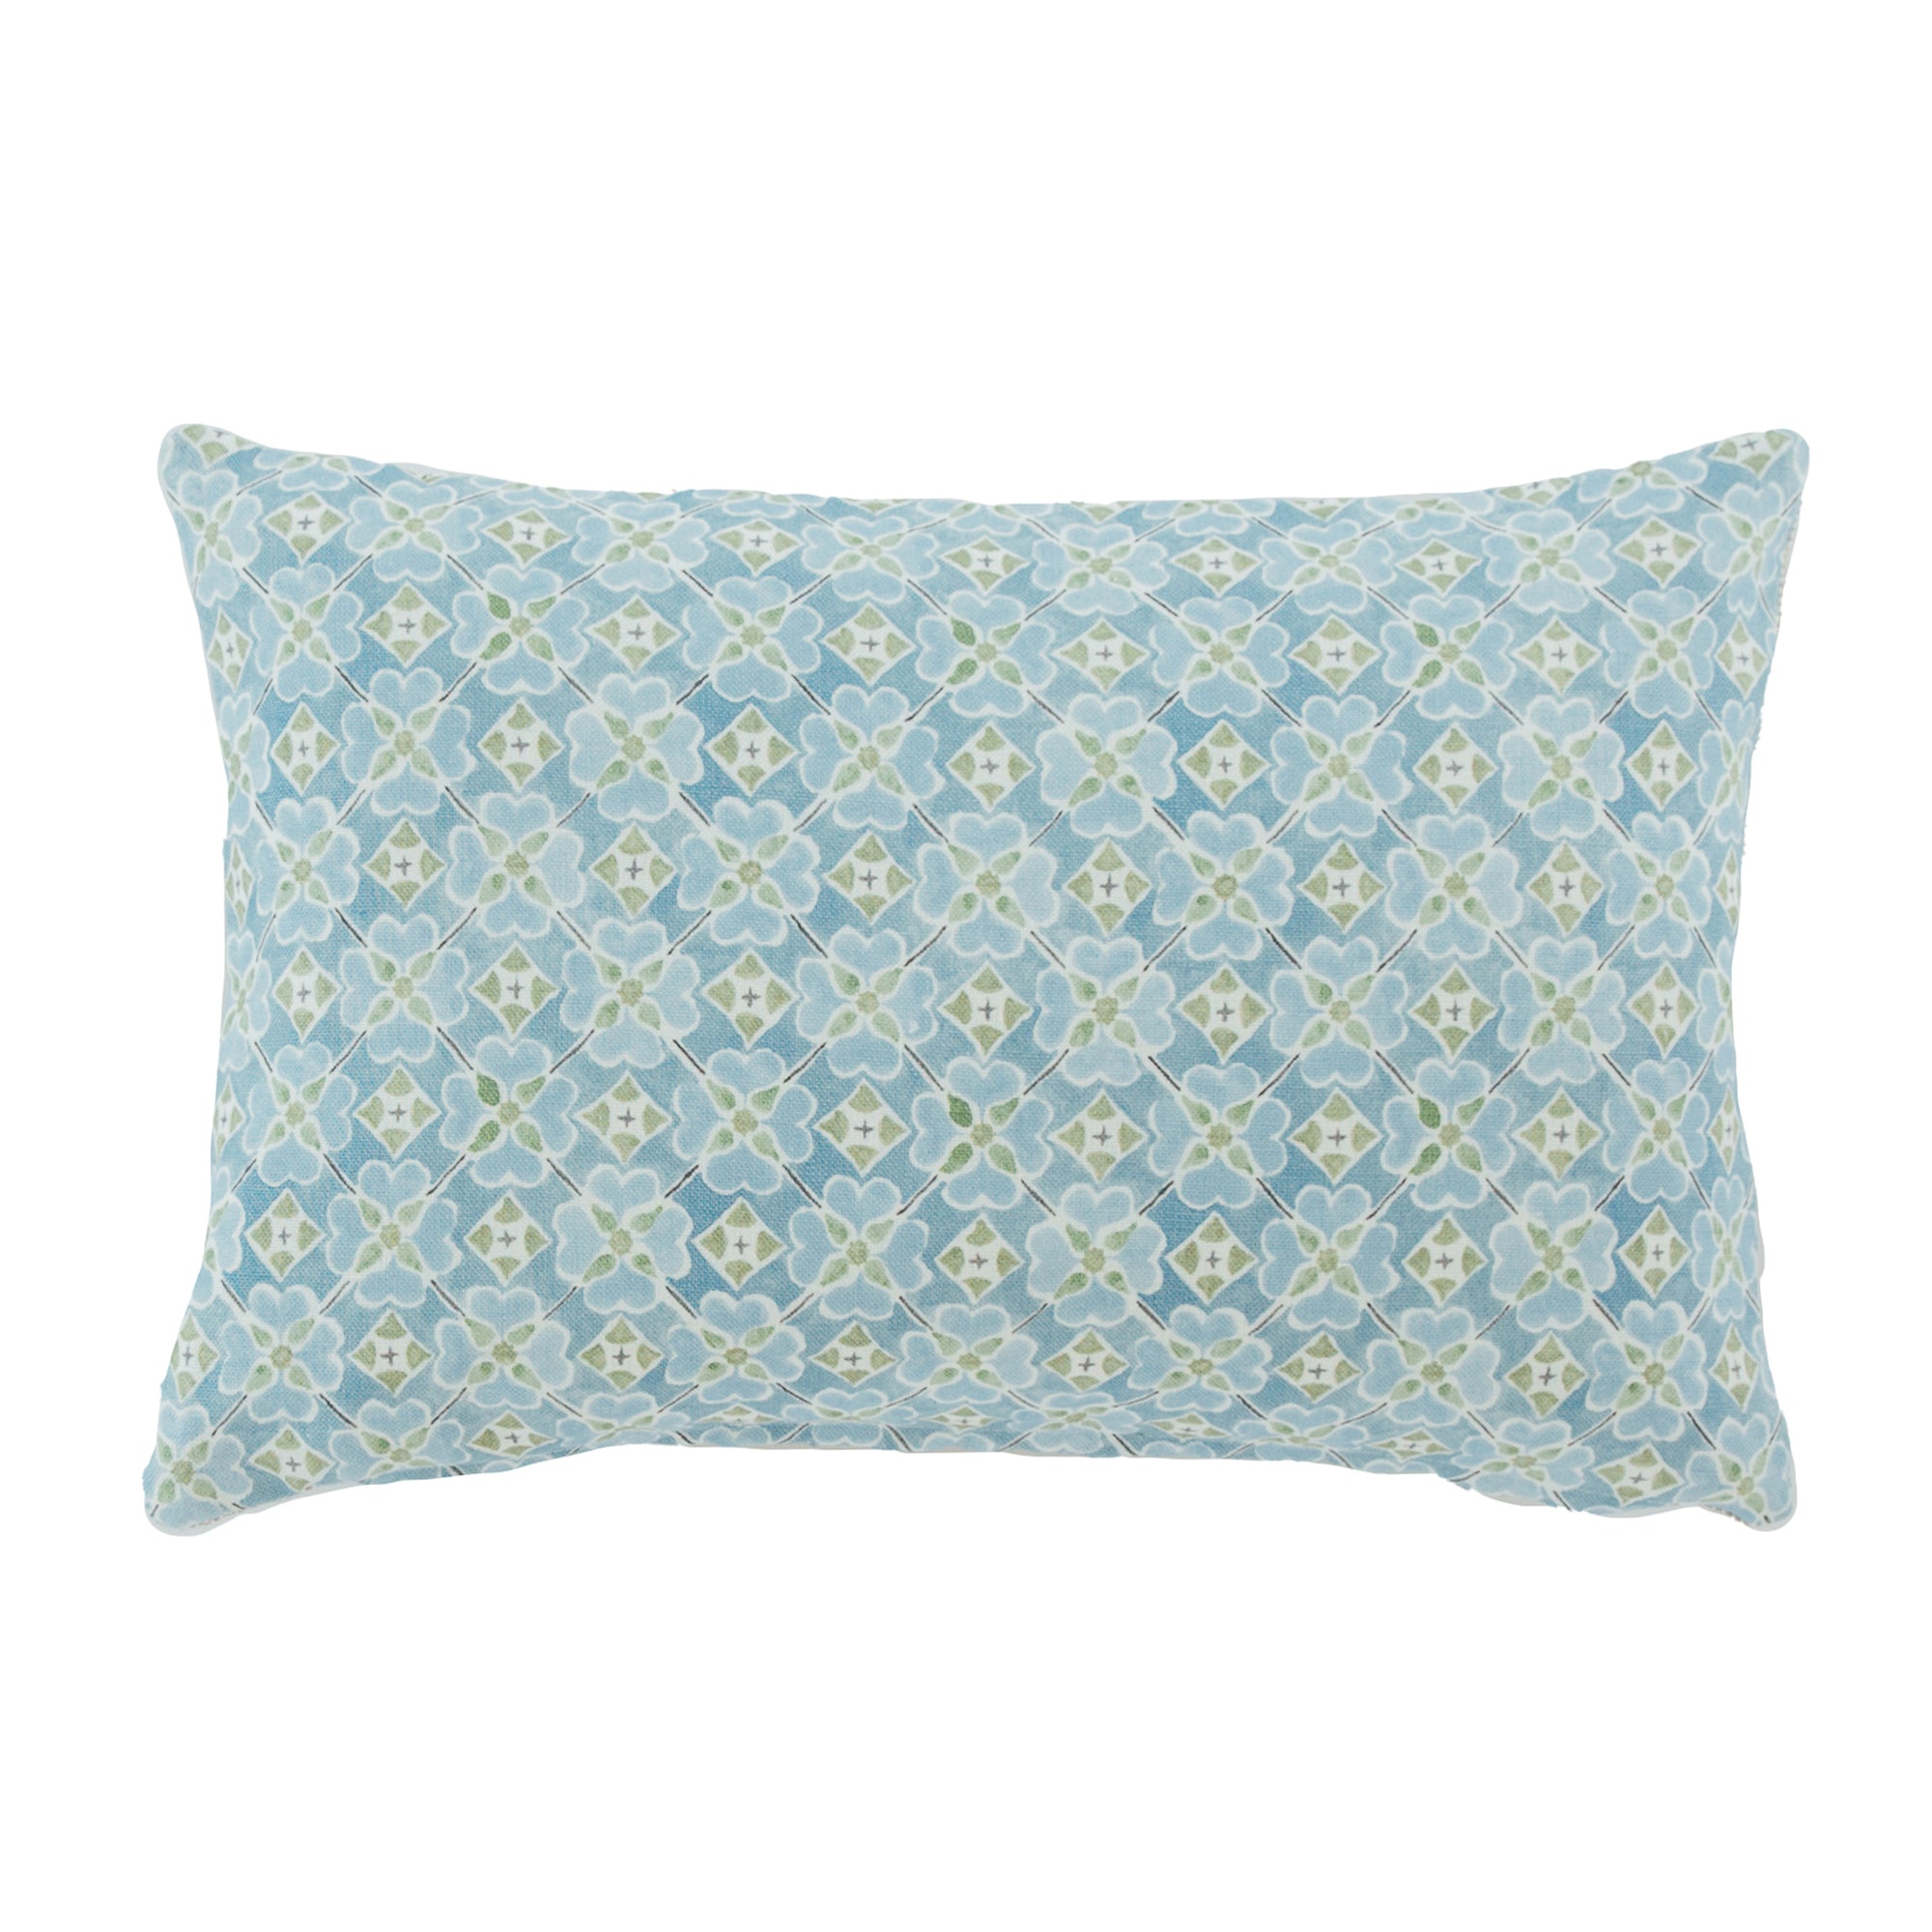 Flora Summers Day Pillow Cover